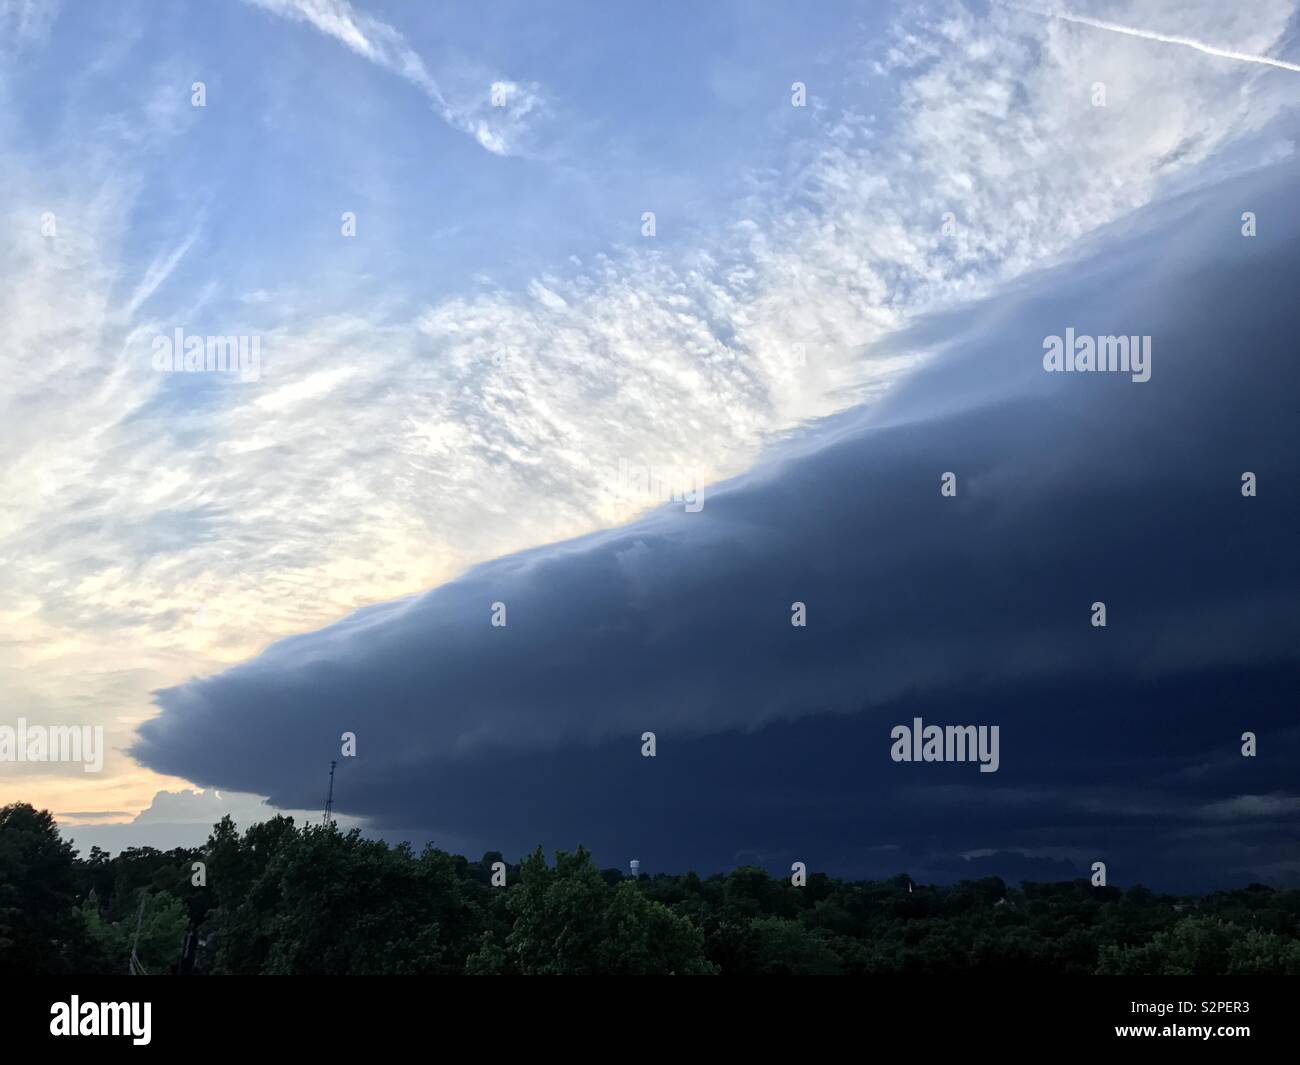 A storm rushes onward. Stock Photo